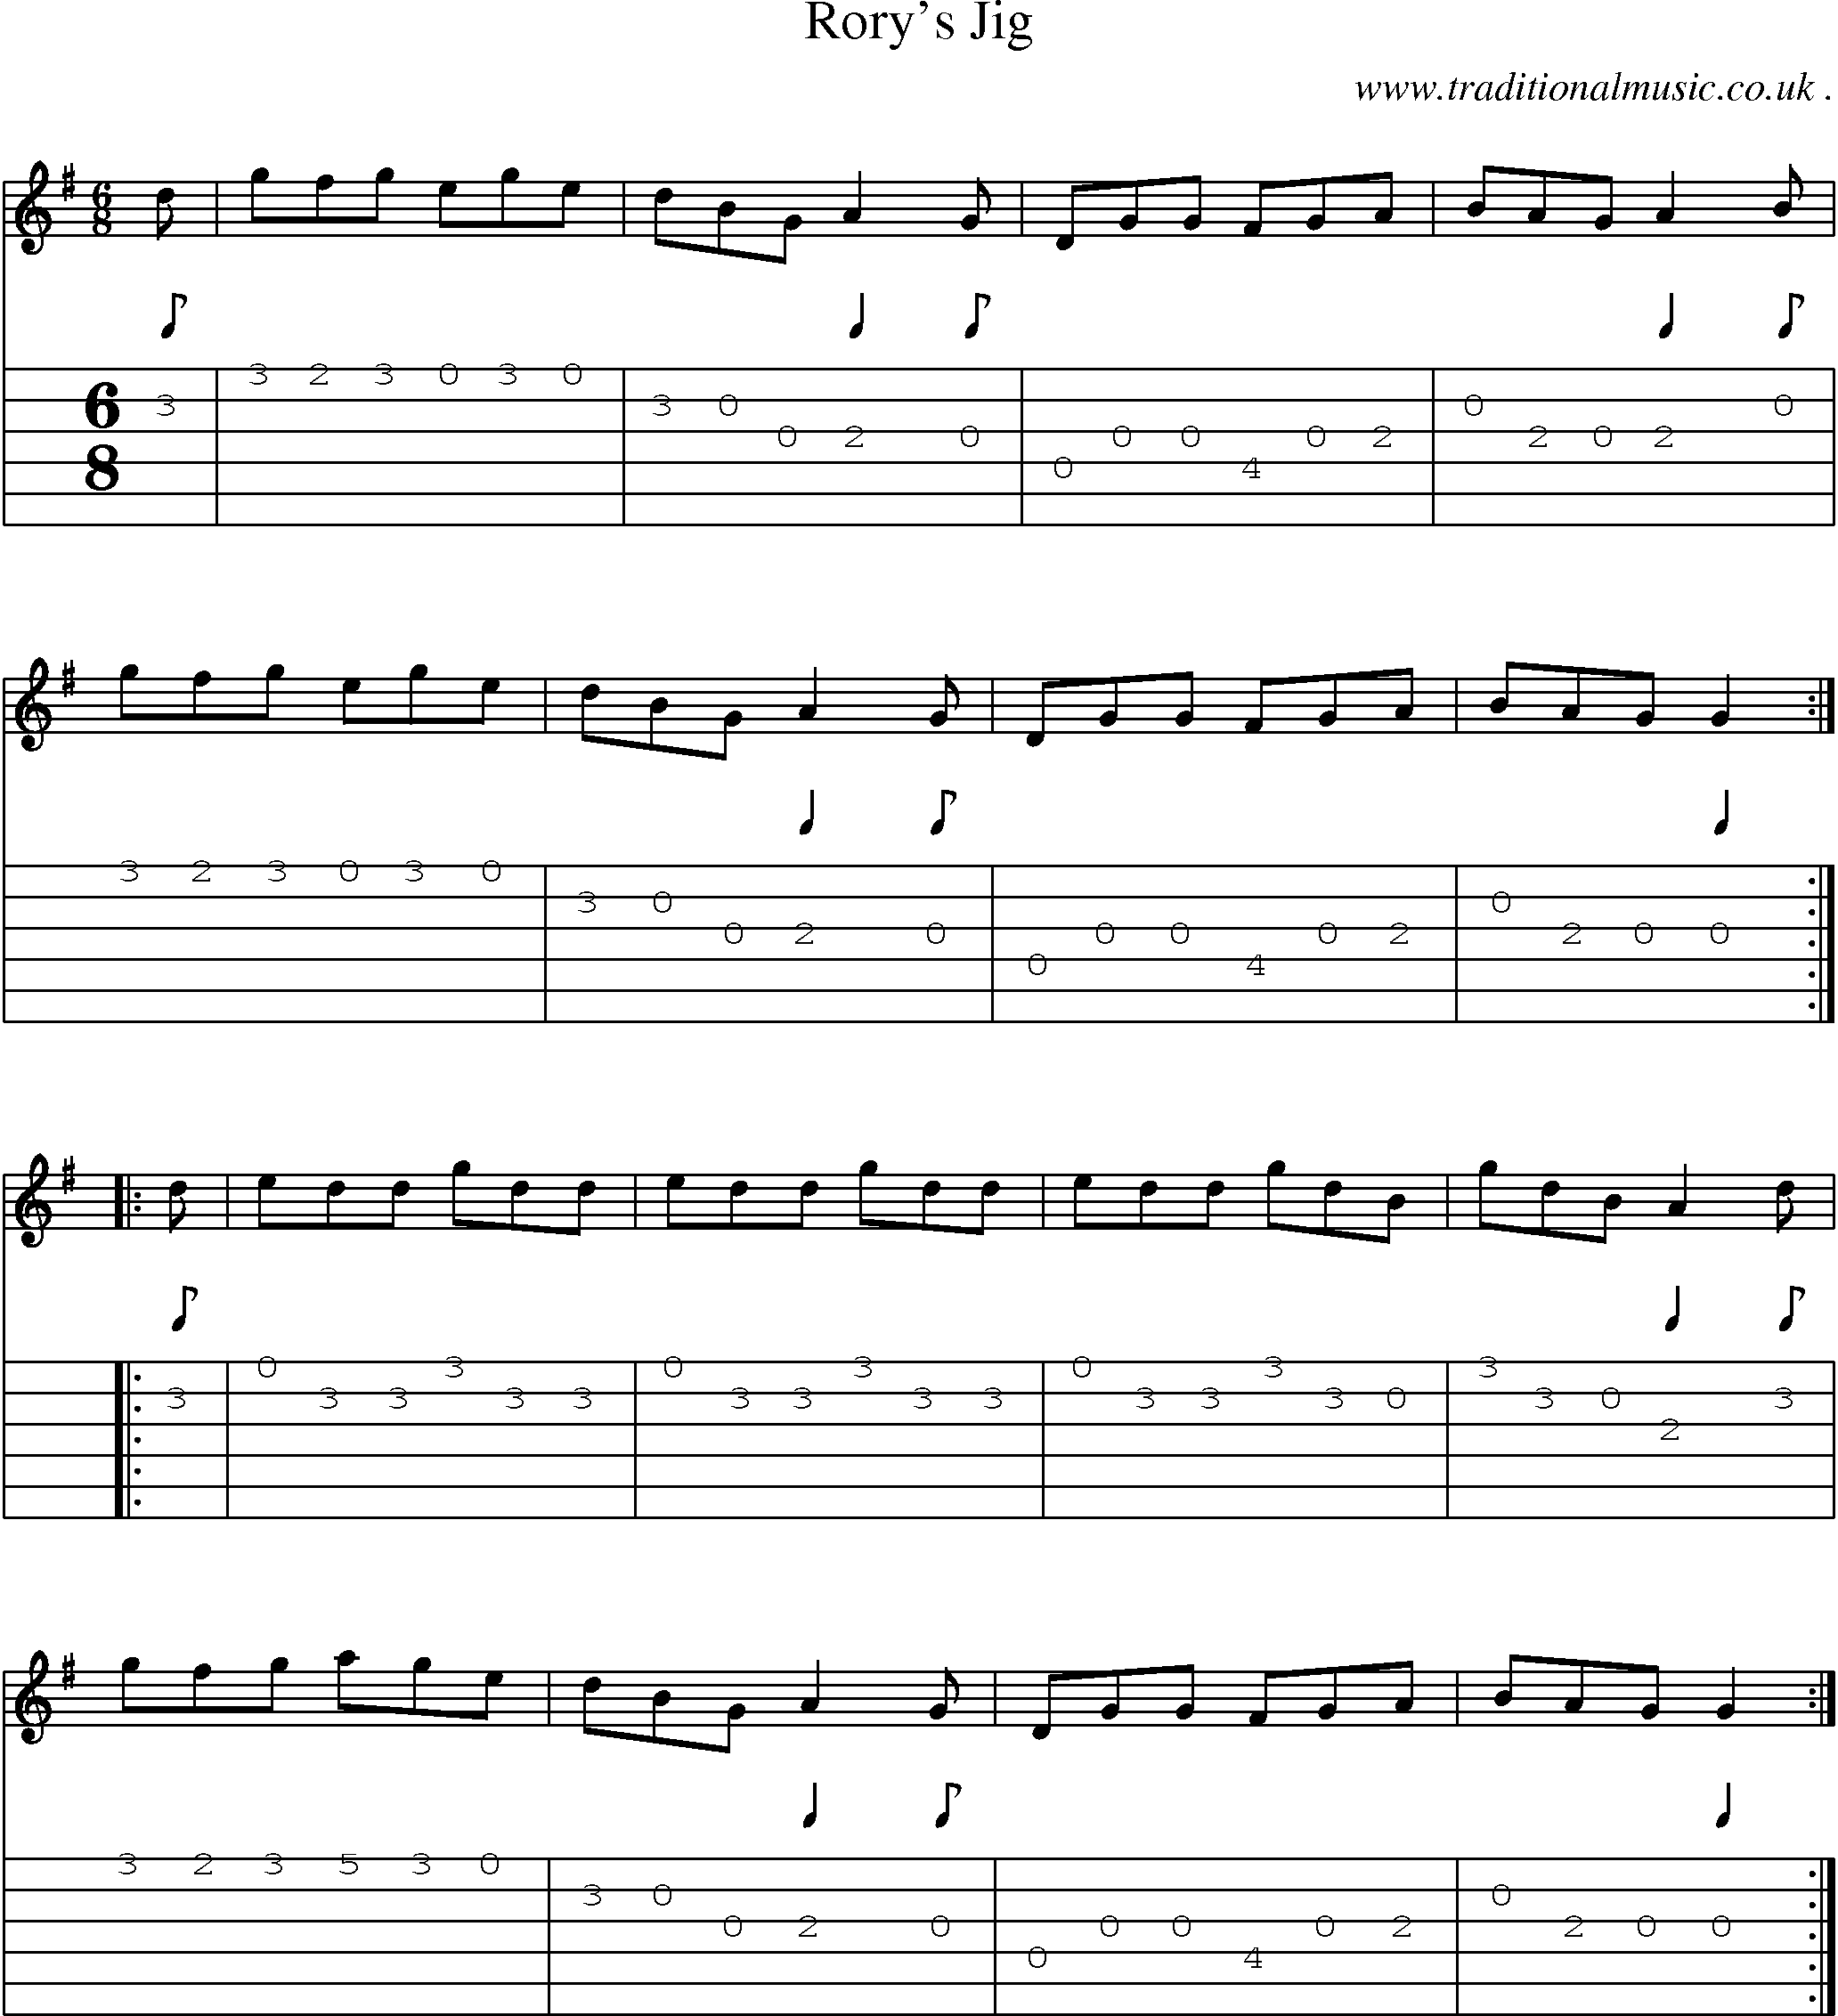 Sheet-Music and Guitar Tabs for Rorys Jig